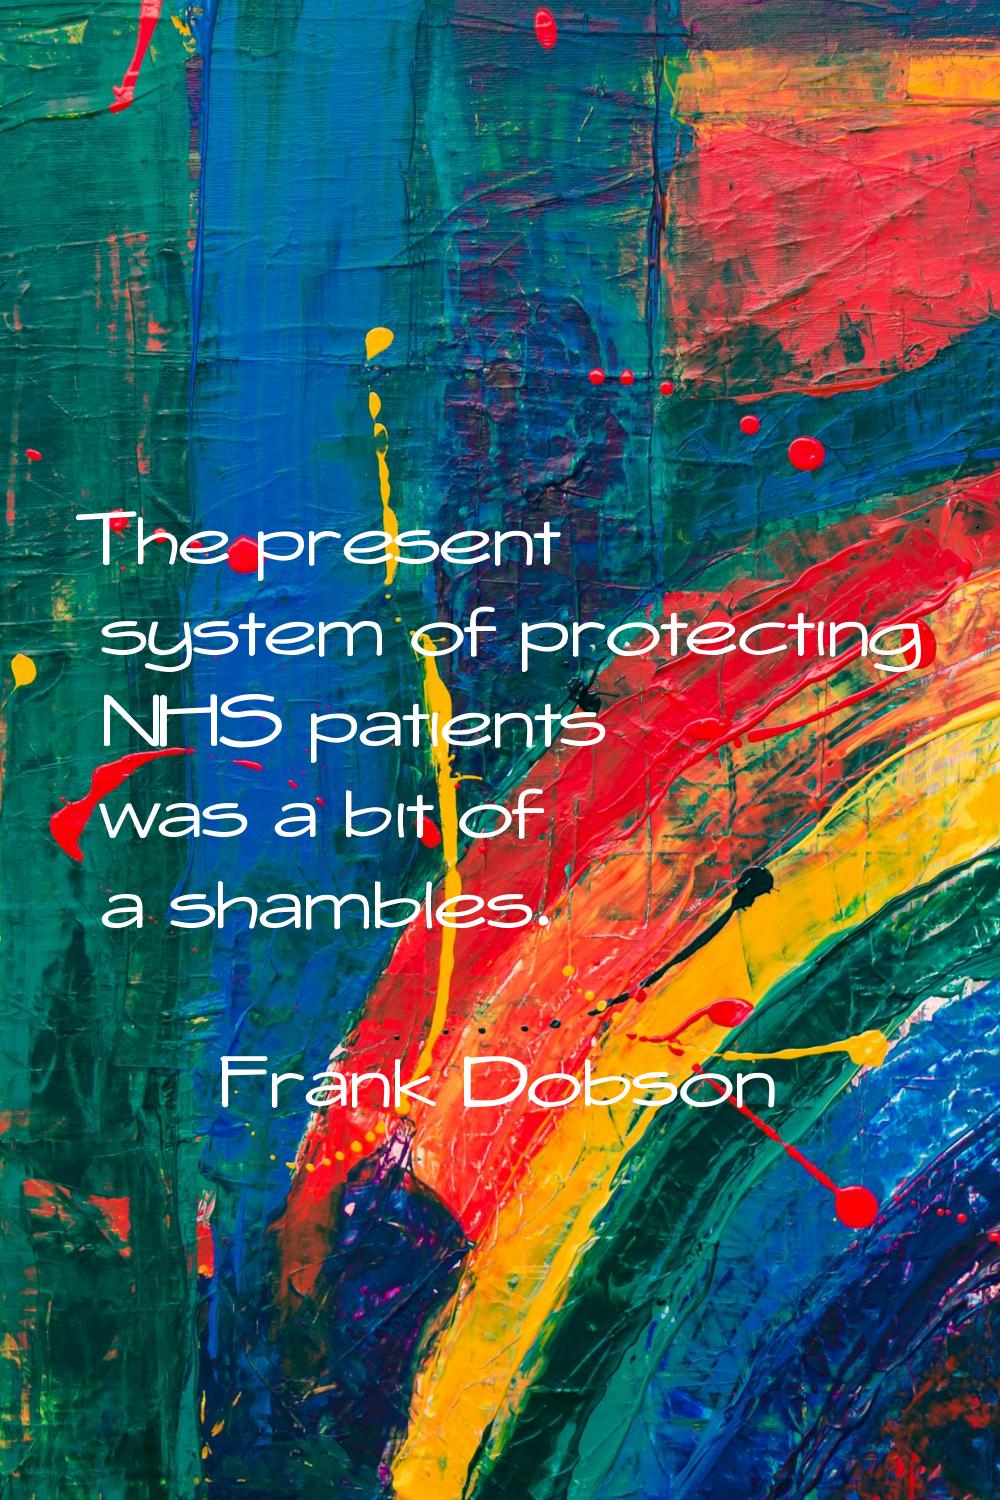 The present system of protecting NHS patients was a bit of a shambles.